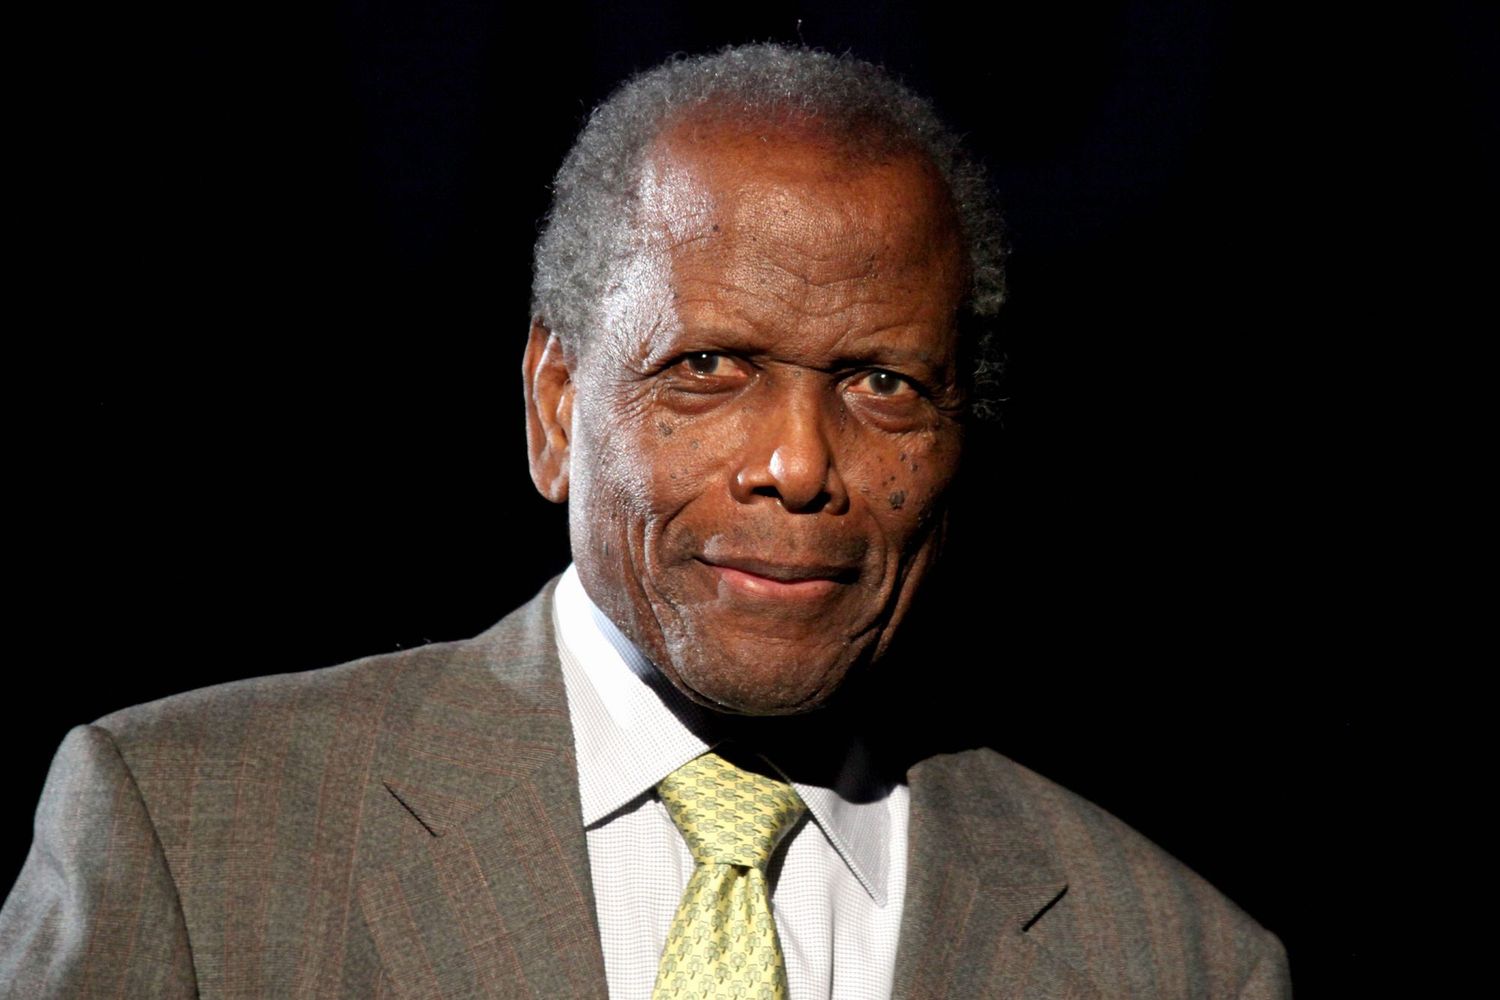 Sidney Poitier Presenting In the Heat of the Night at AFI's Night at the Movies in Hollywood on April 24, 2013